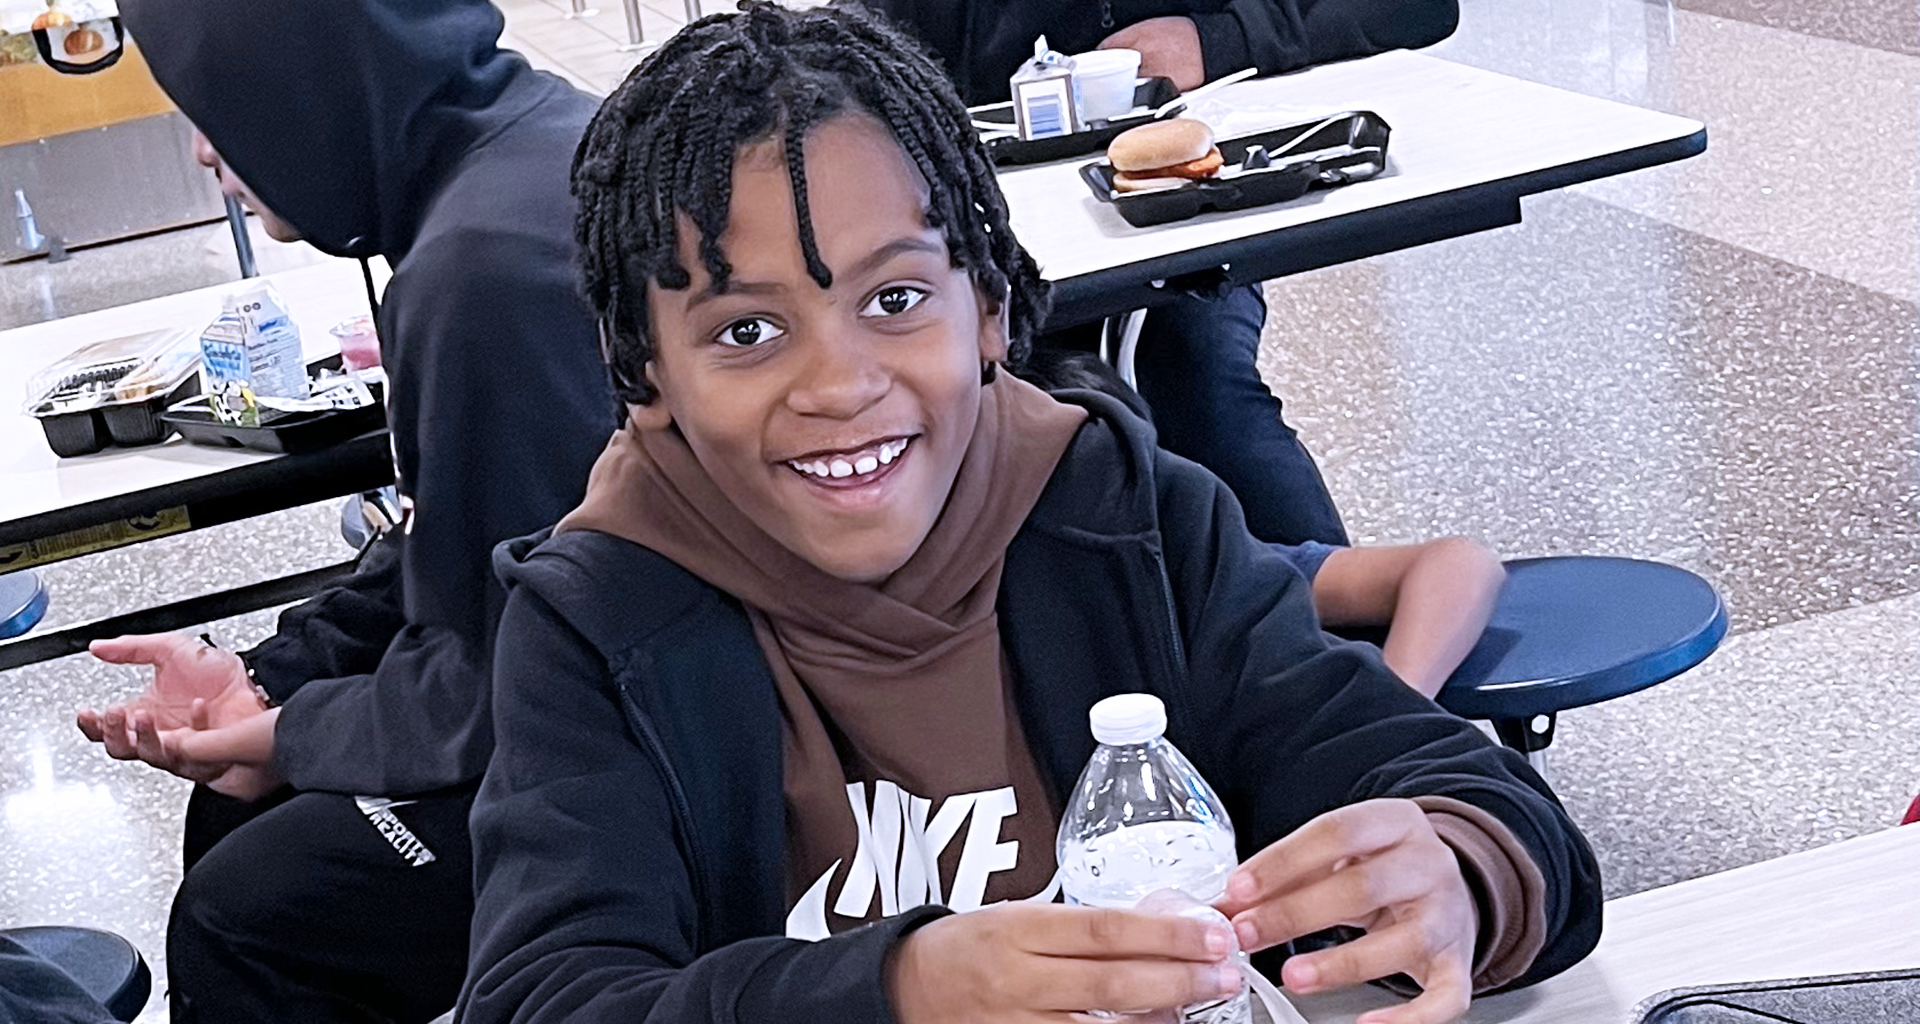 Student sitting in lunch room smiles for a photo